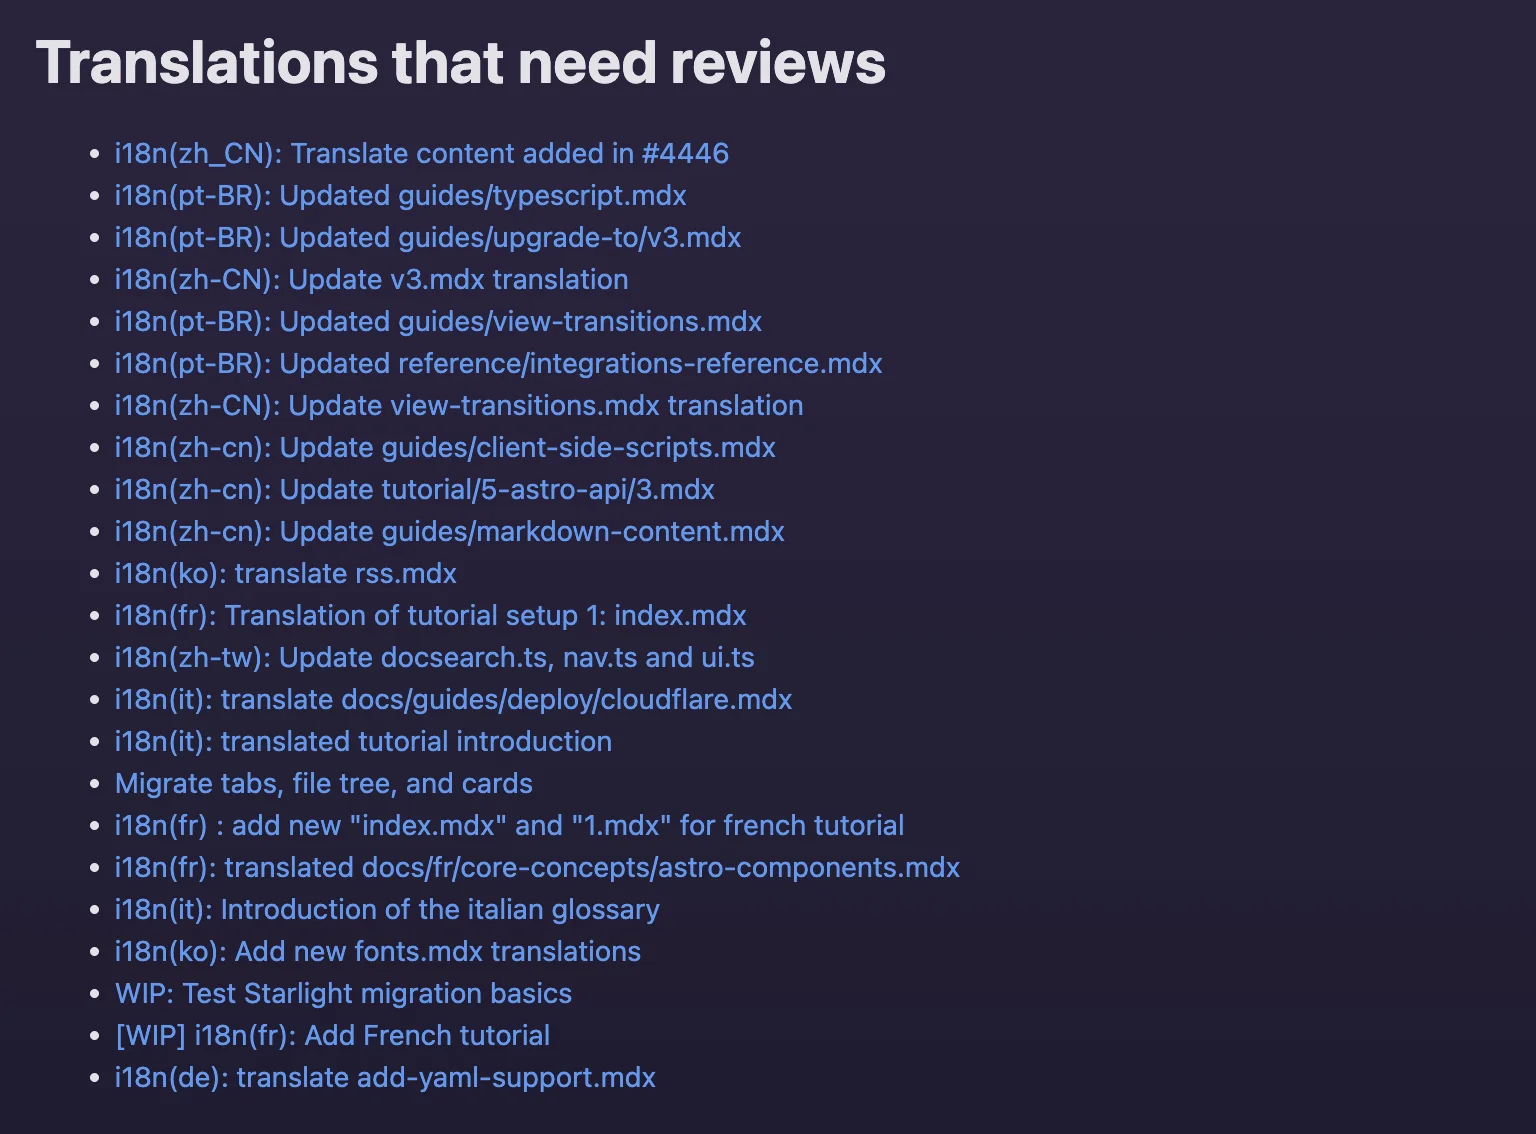 A list of open PRs needing reviews, for example 'i18n(ko) translate rss.mdx'